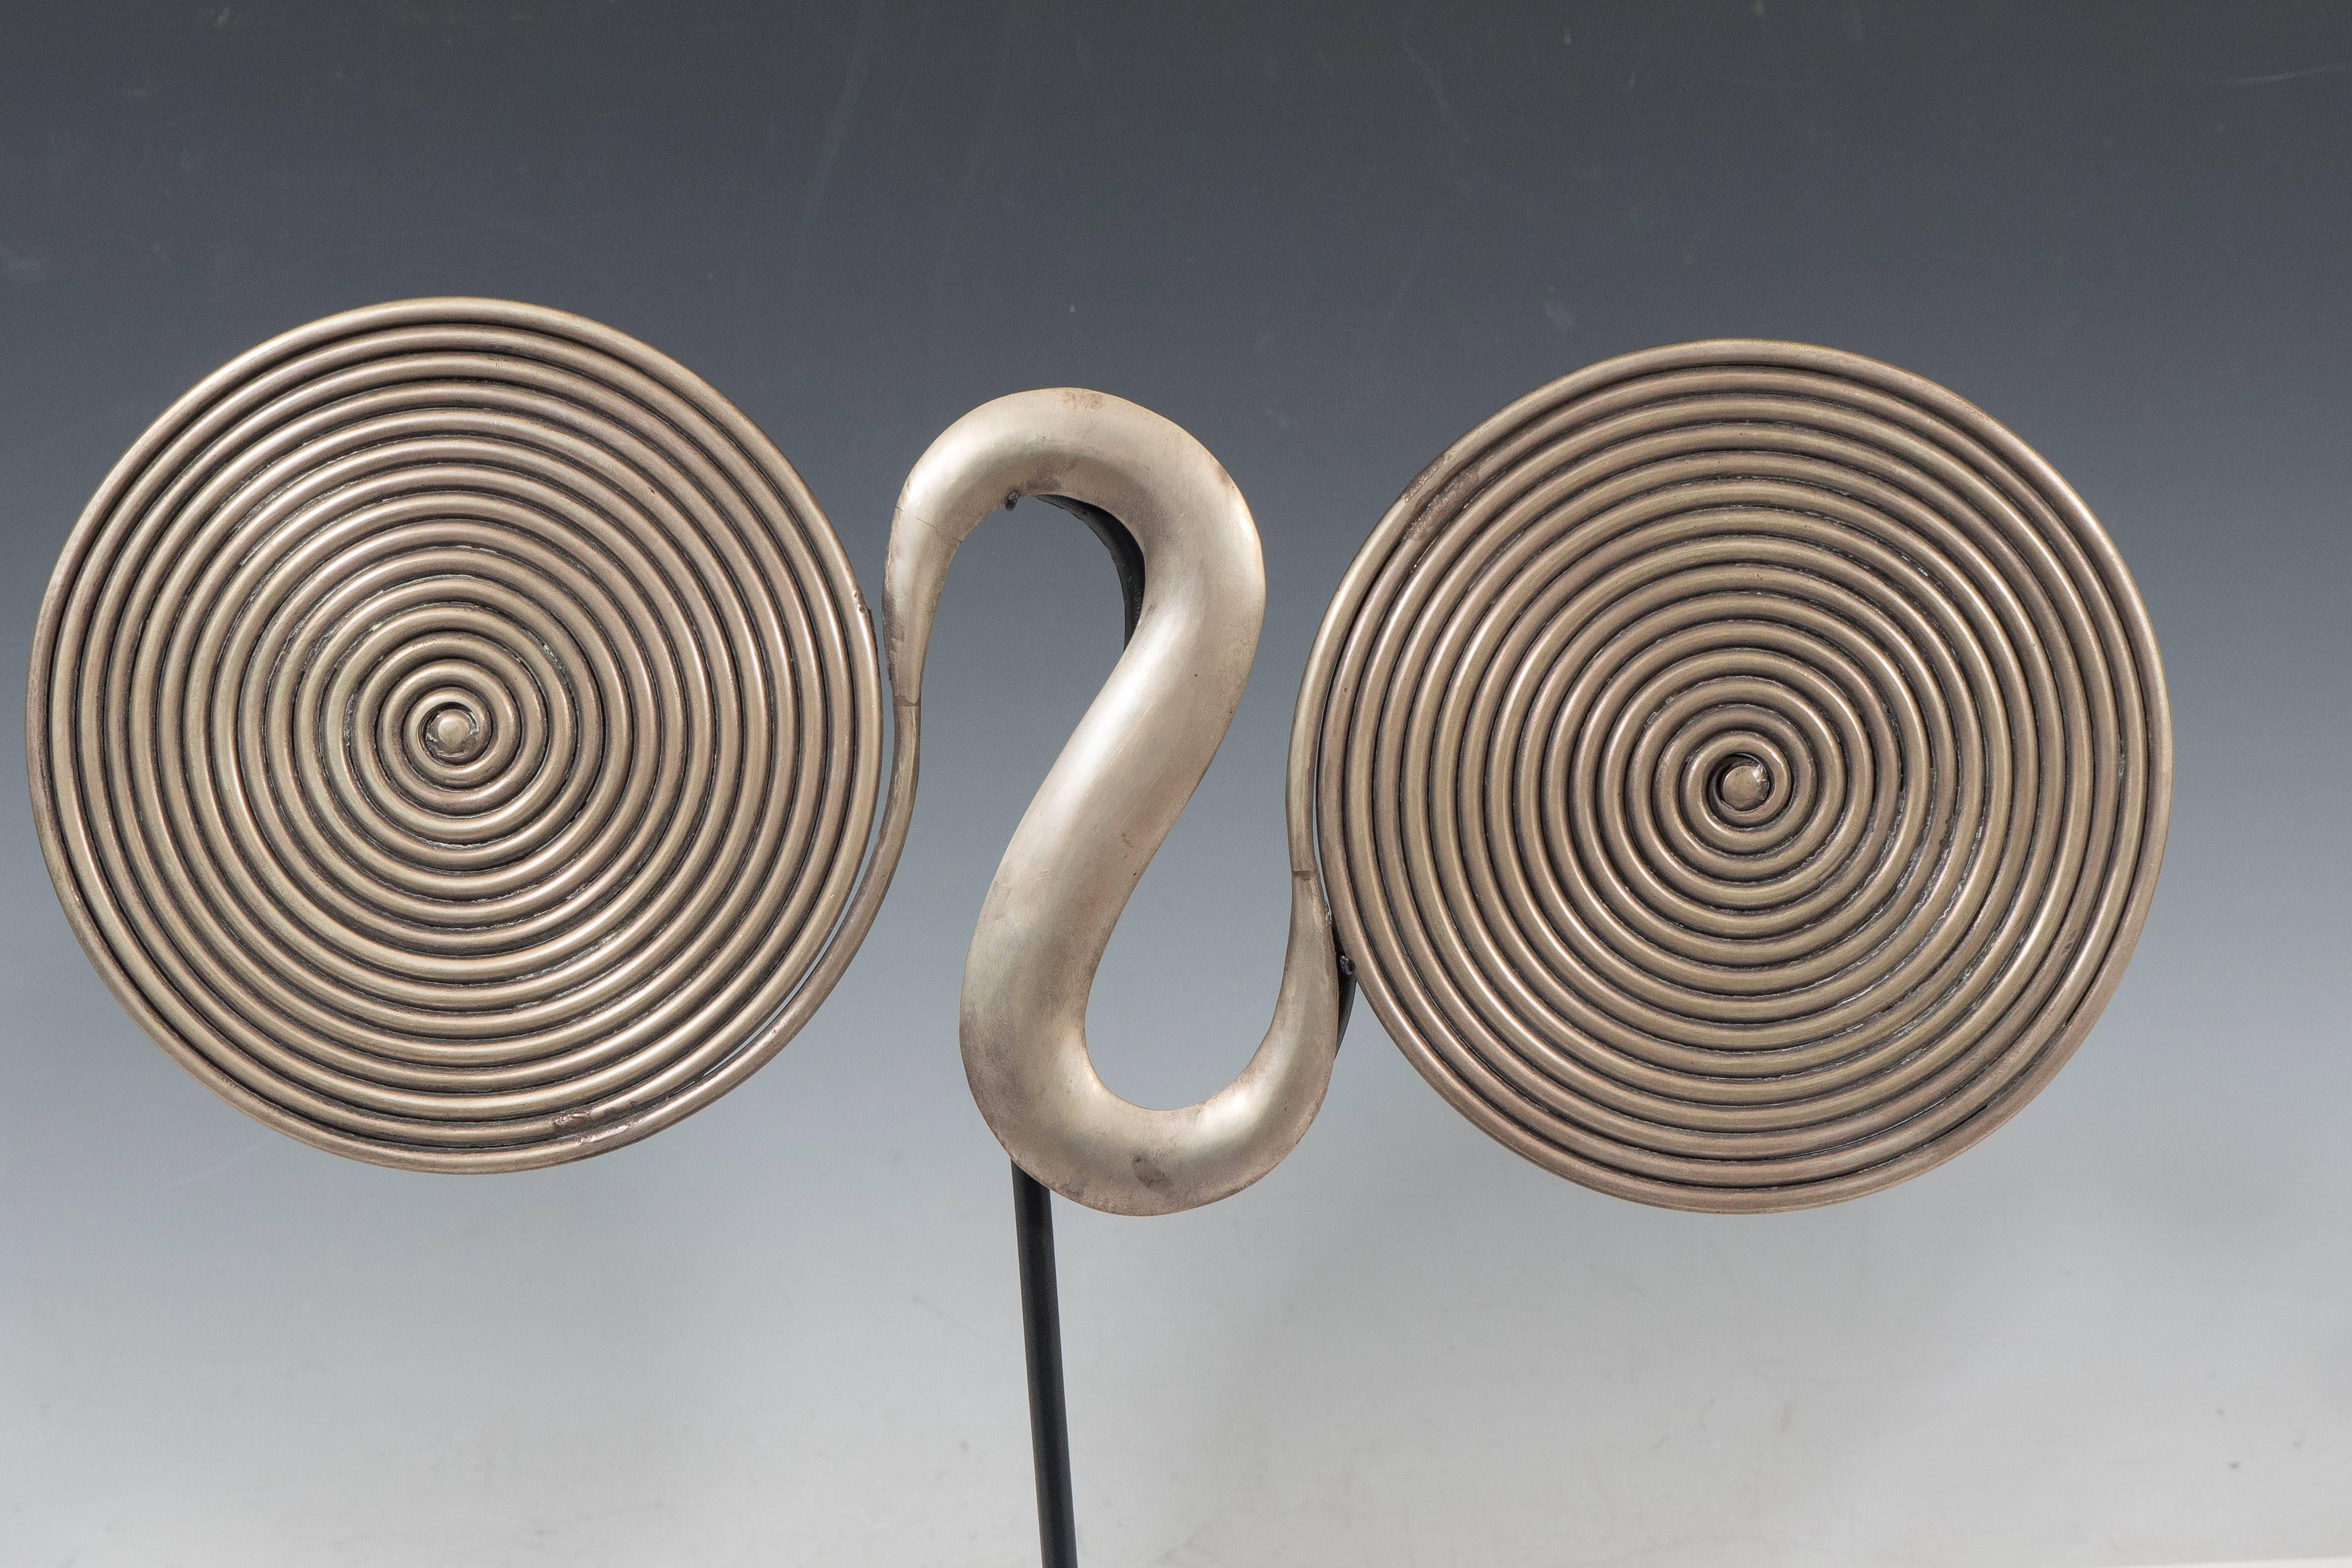 A vintage brass sculpture, influenced by Miao Hook tribal talismans of China. It consists of two tightly wound coils connected with a stylized hook, set on a black metal stand. Good vintage condition.